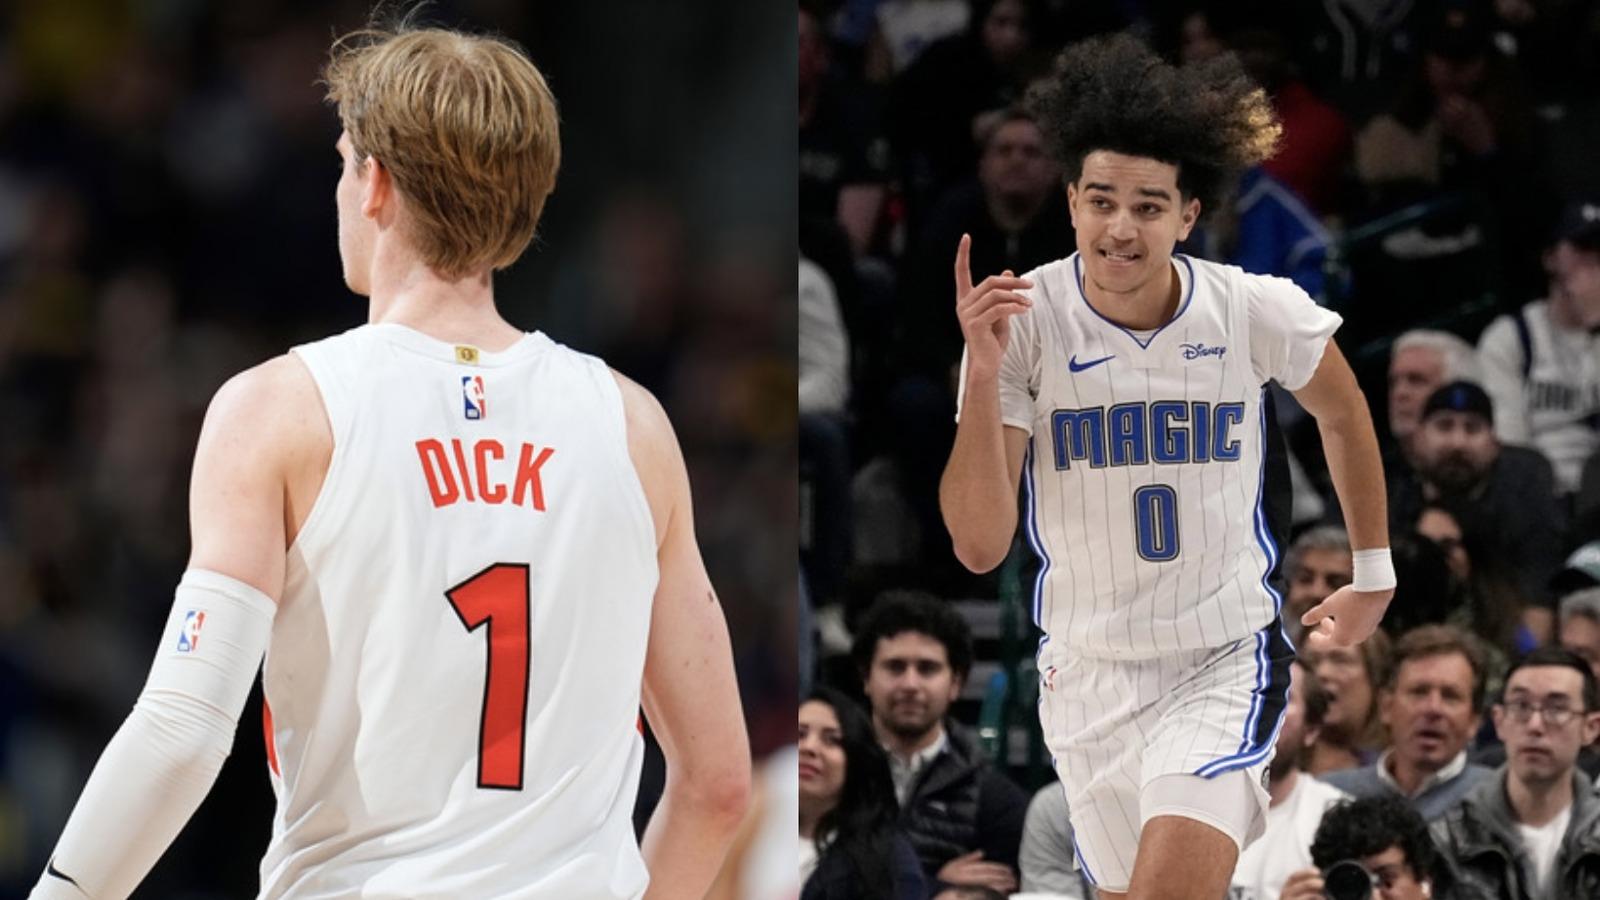 A recent NBA jersey swap between Gradey Dick and Anthony Black went viral for all the wrong reasons.